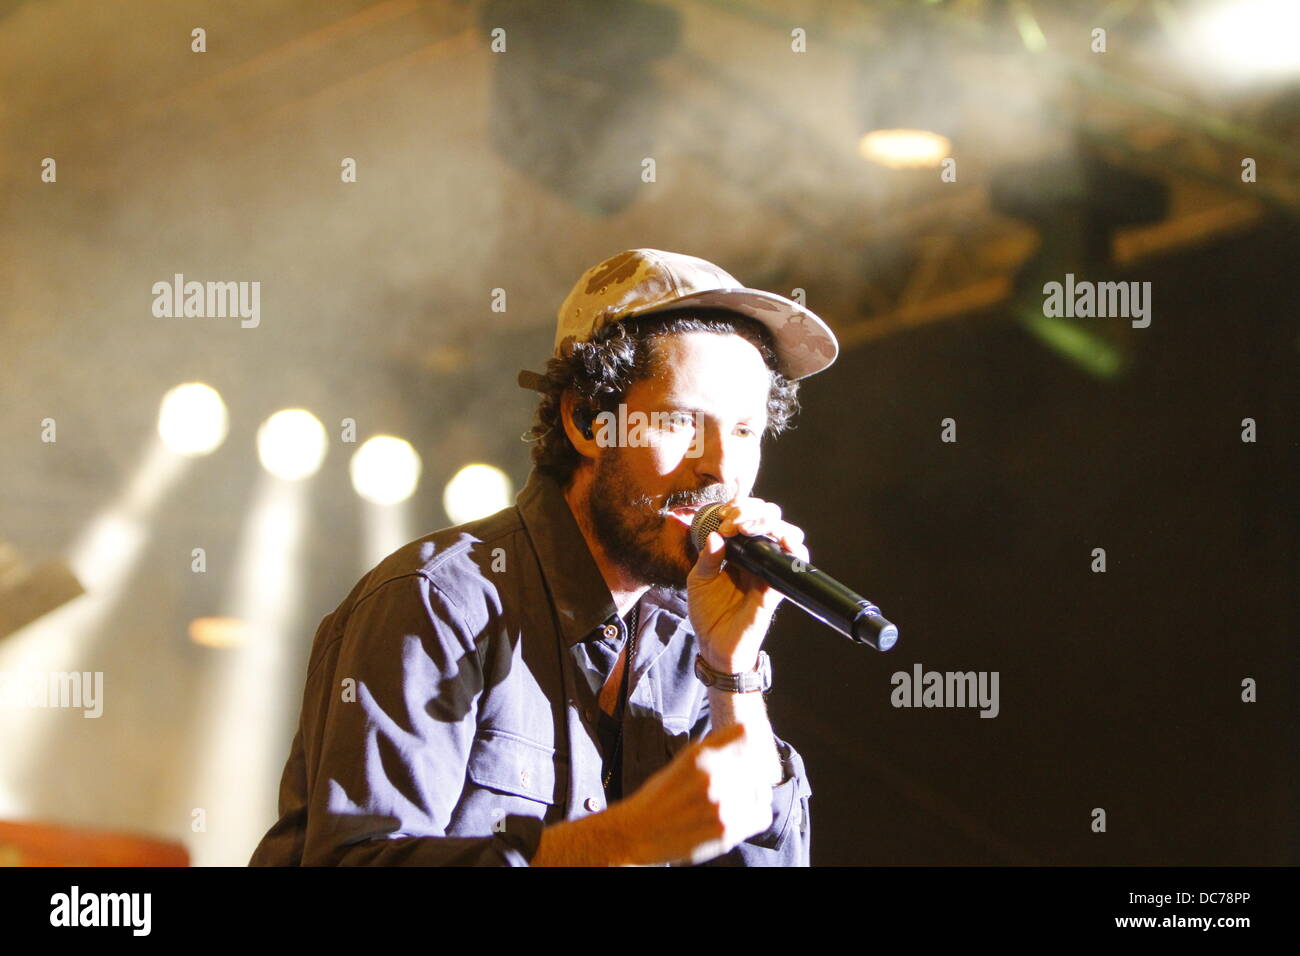 Worms, Germany. 10th August 2013. Singer Max Herre is pictured on stage.  The German singer Max Herre performed live at the Jazz & Joy Festival 2013  in Worms. Max Herre is a